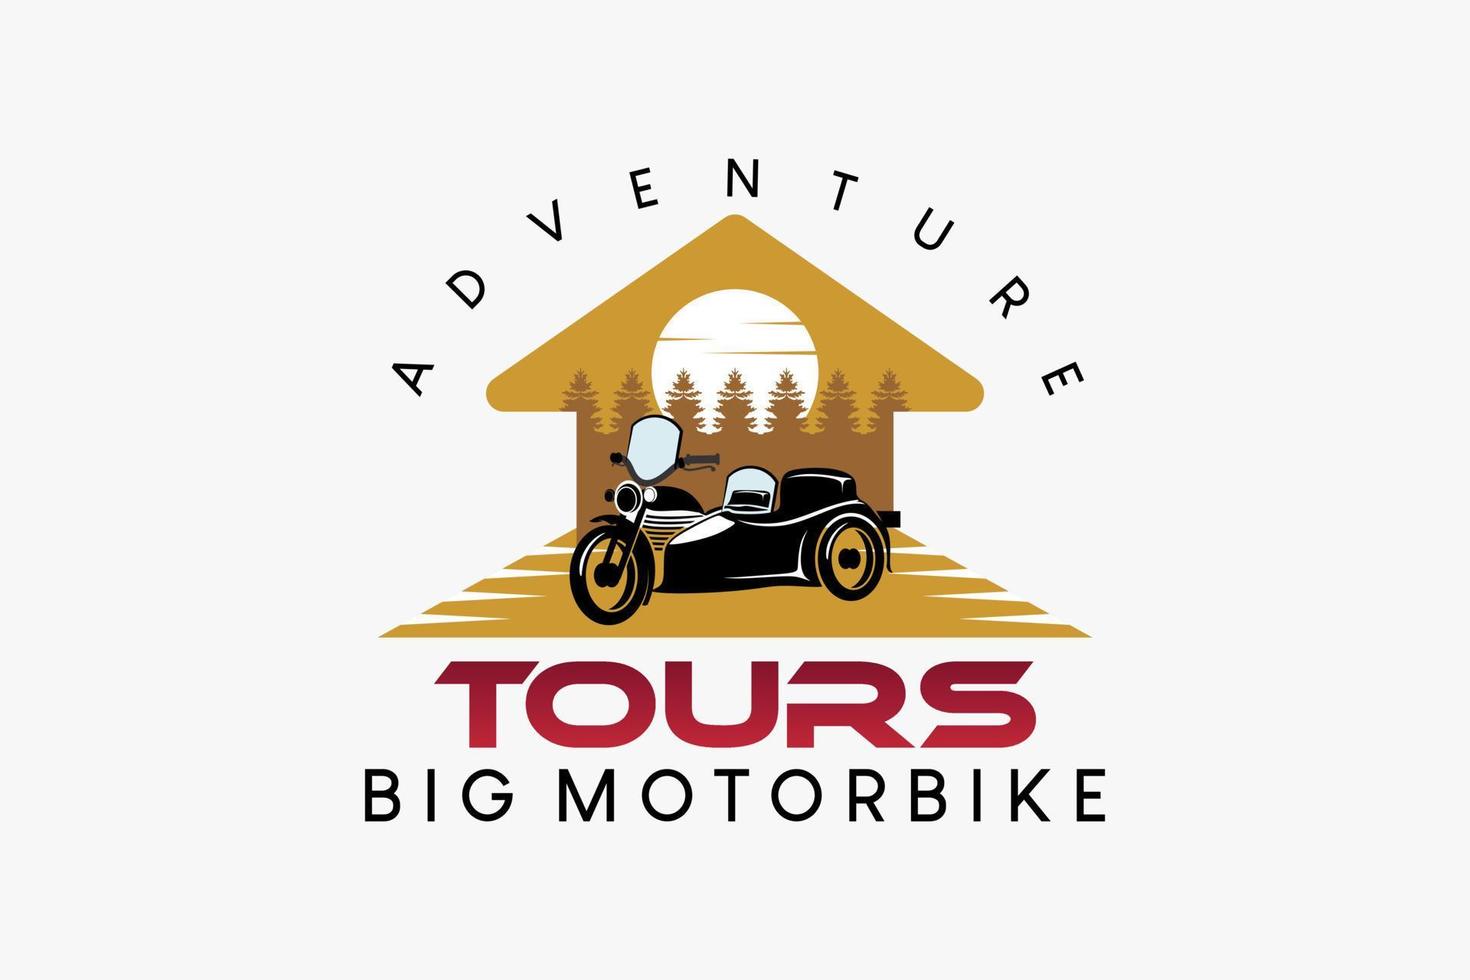 Big motorcycle sidecar logo design for travel or adventure, big motorcycle silhouette combined with nature in a home icon vector